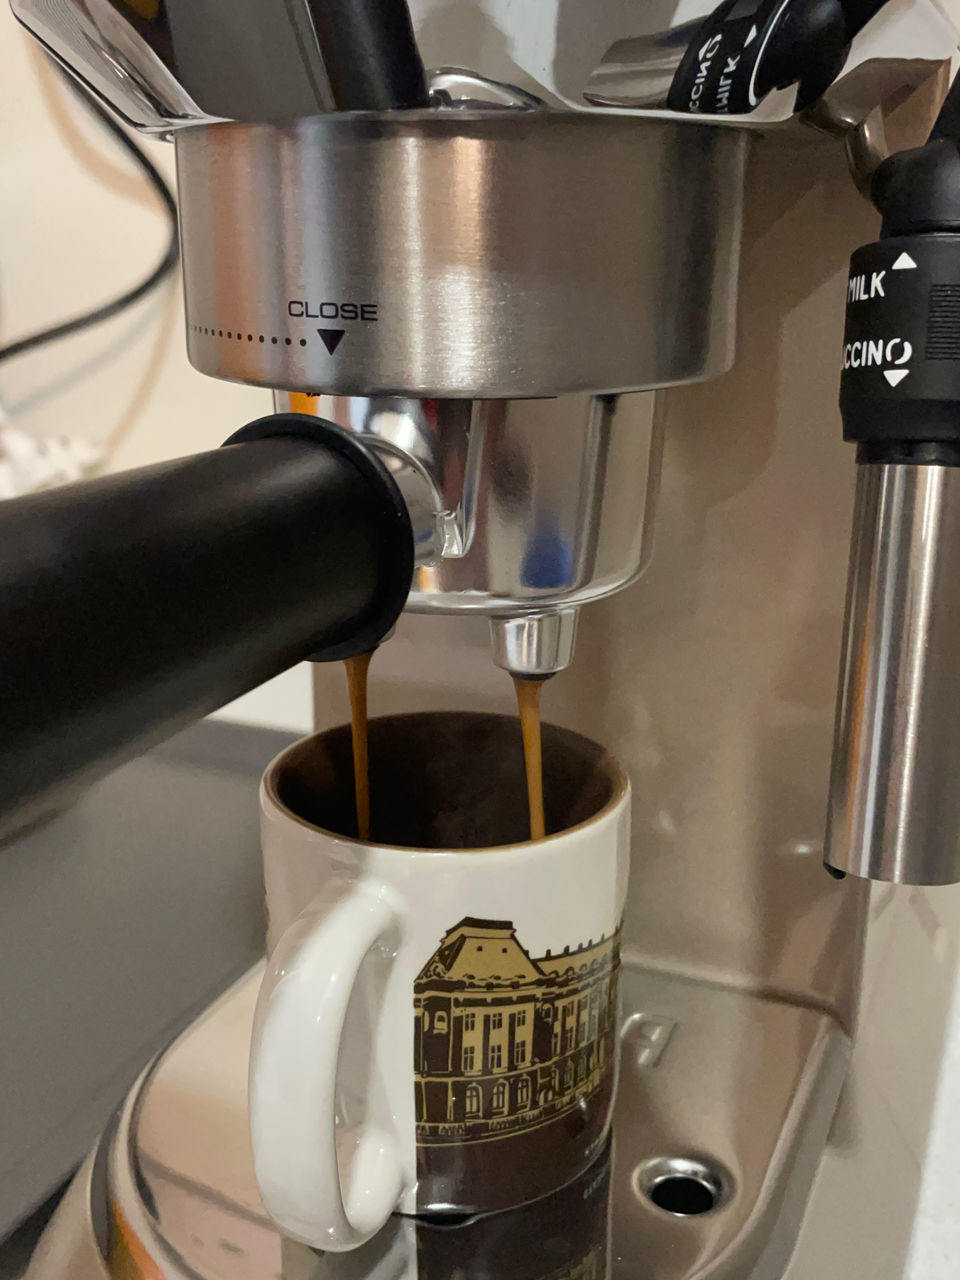 espresso machine, coffee, coffeemaker, espresso maker, food and drink, drink, small appliance, drip coffee maker, coffee cup, cup, indoors, pouring, mug, refreshment, home appliance, appliance, machinery, coffee shop, close-up, cafe, making